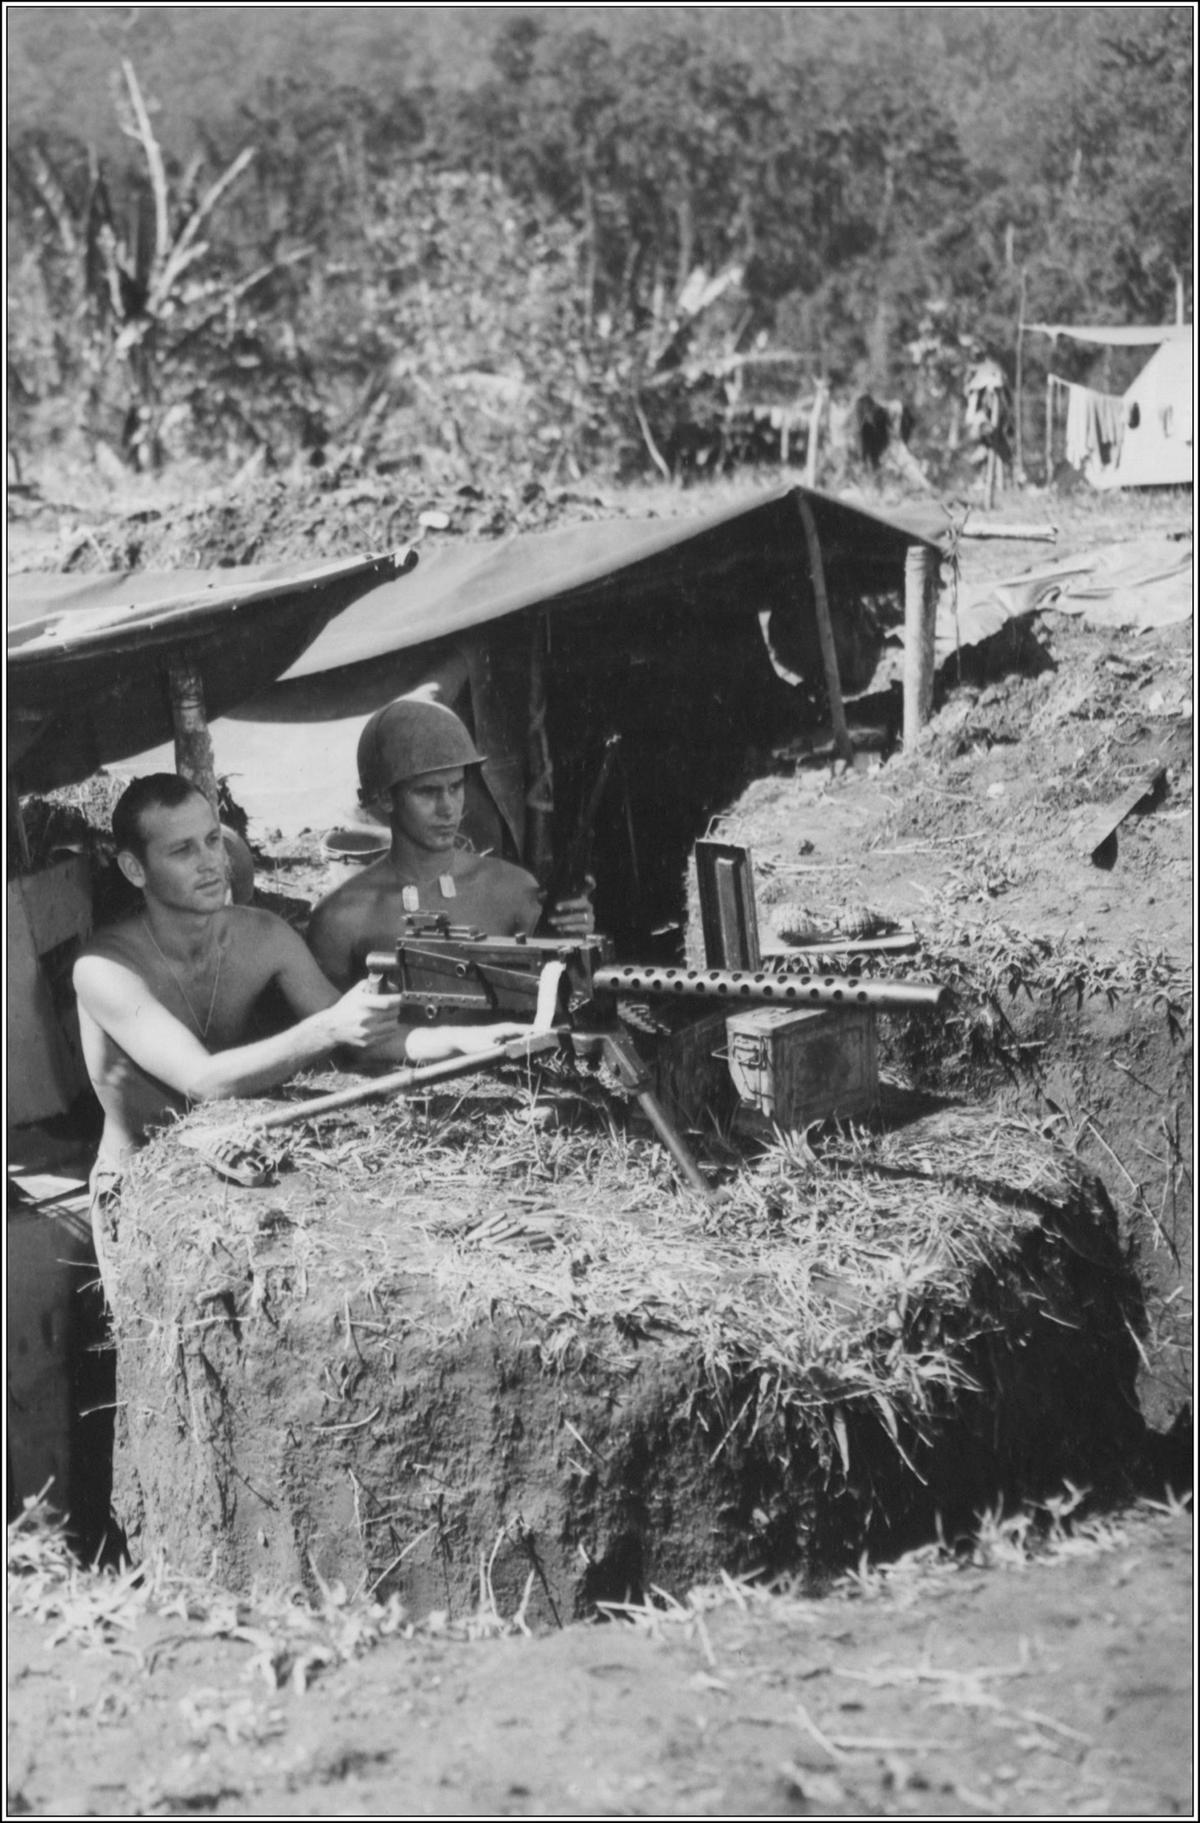 Sgt. Don Singery (L) and Cpl. John D. Moore man a .30-caliber machine gun on Manarawat’s perimeter. (<span style="font-weight: 400;">U.S. Army Archives</span>)